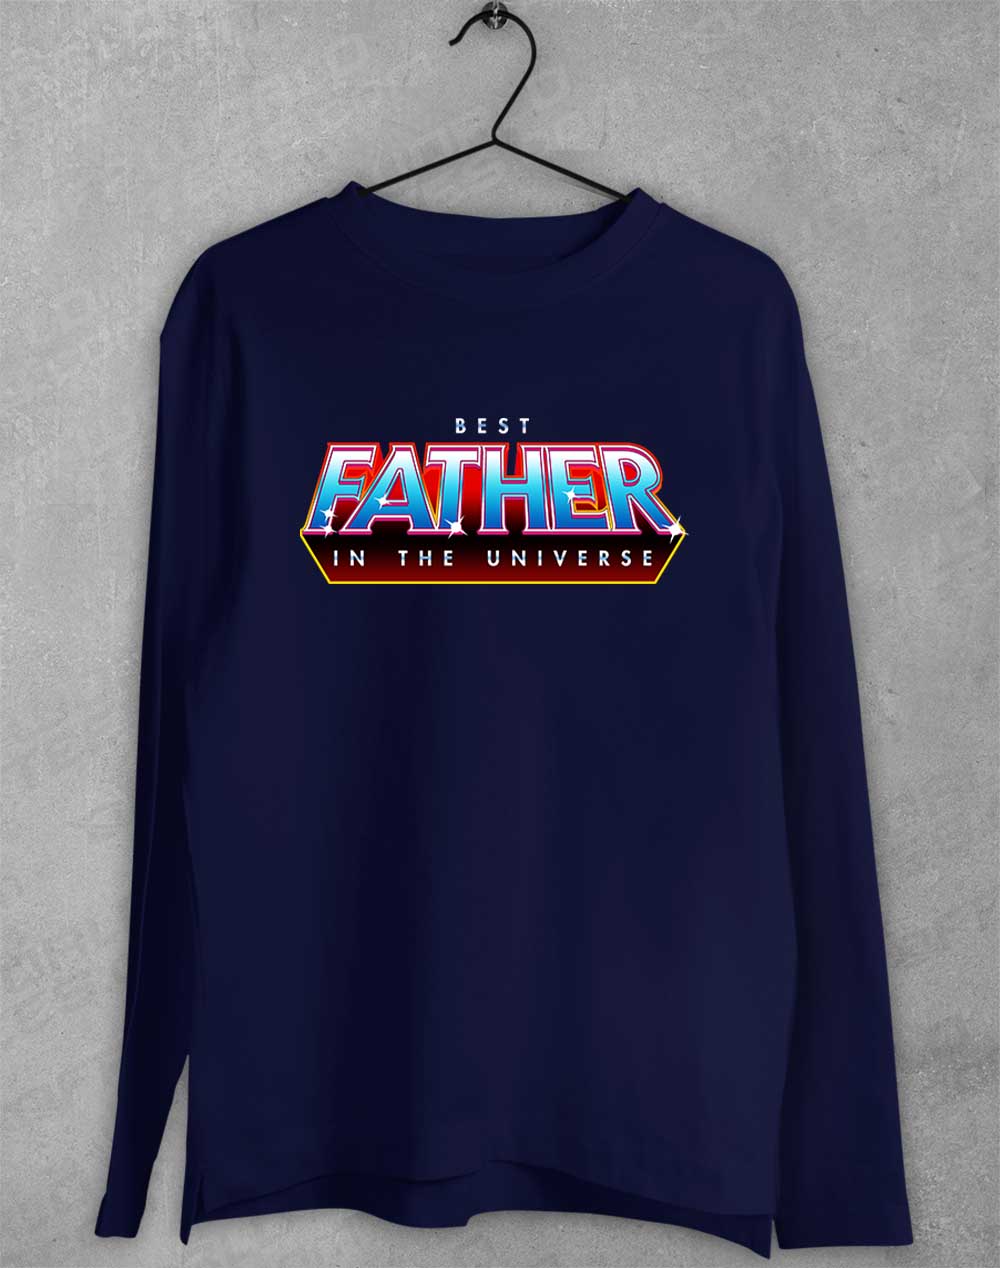 Navy - Best Father in the Universe Long Sleeve T-Shirt